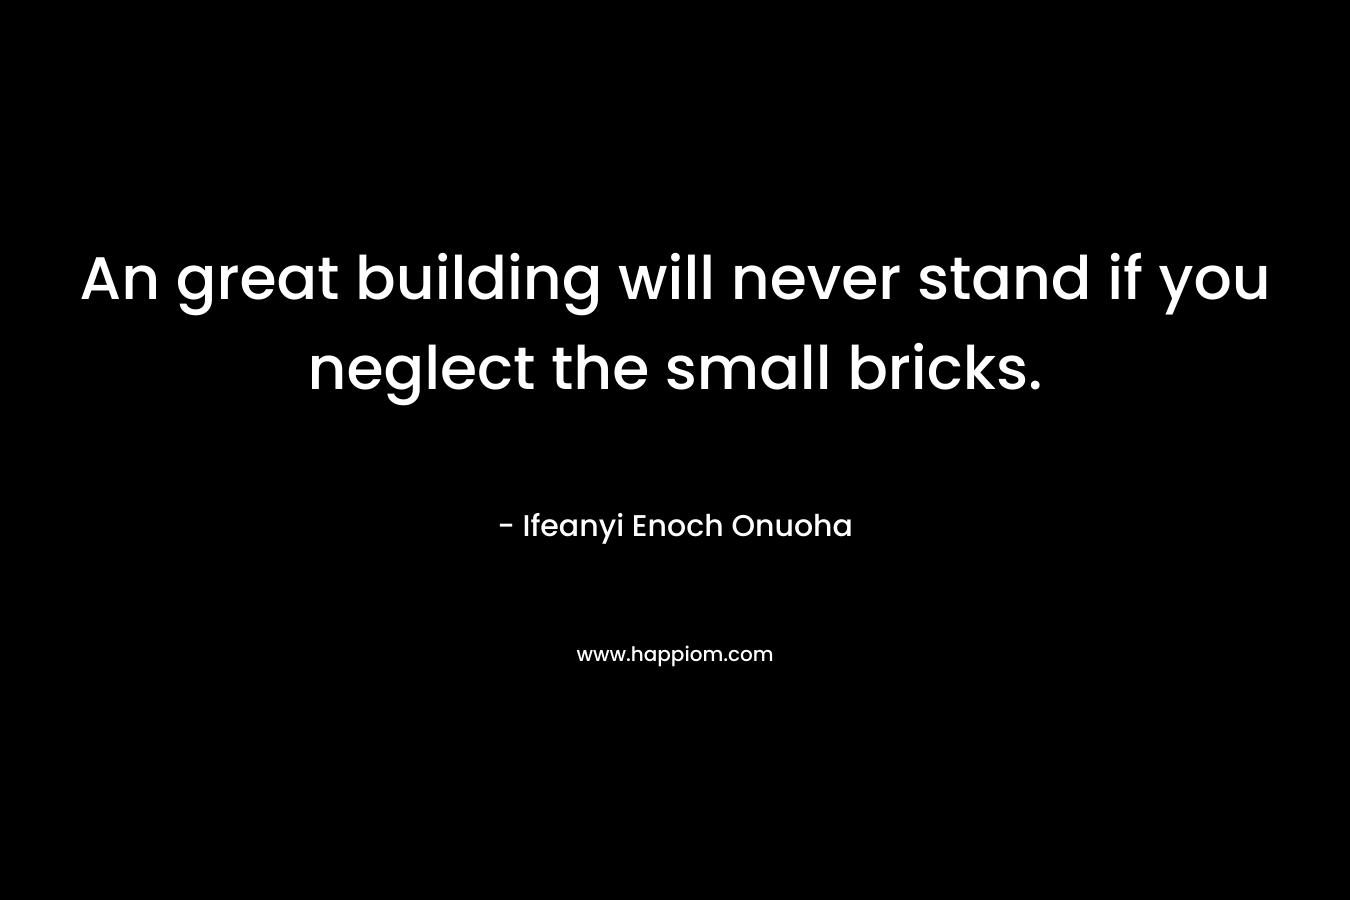 An great building will never stand if you neglect the small bricks. – Ifeanyi Enoch Onuoha